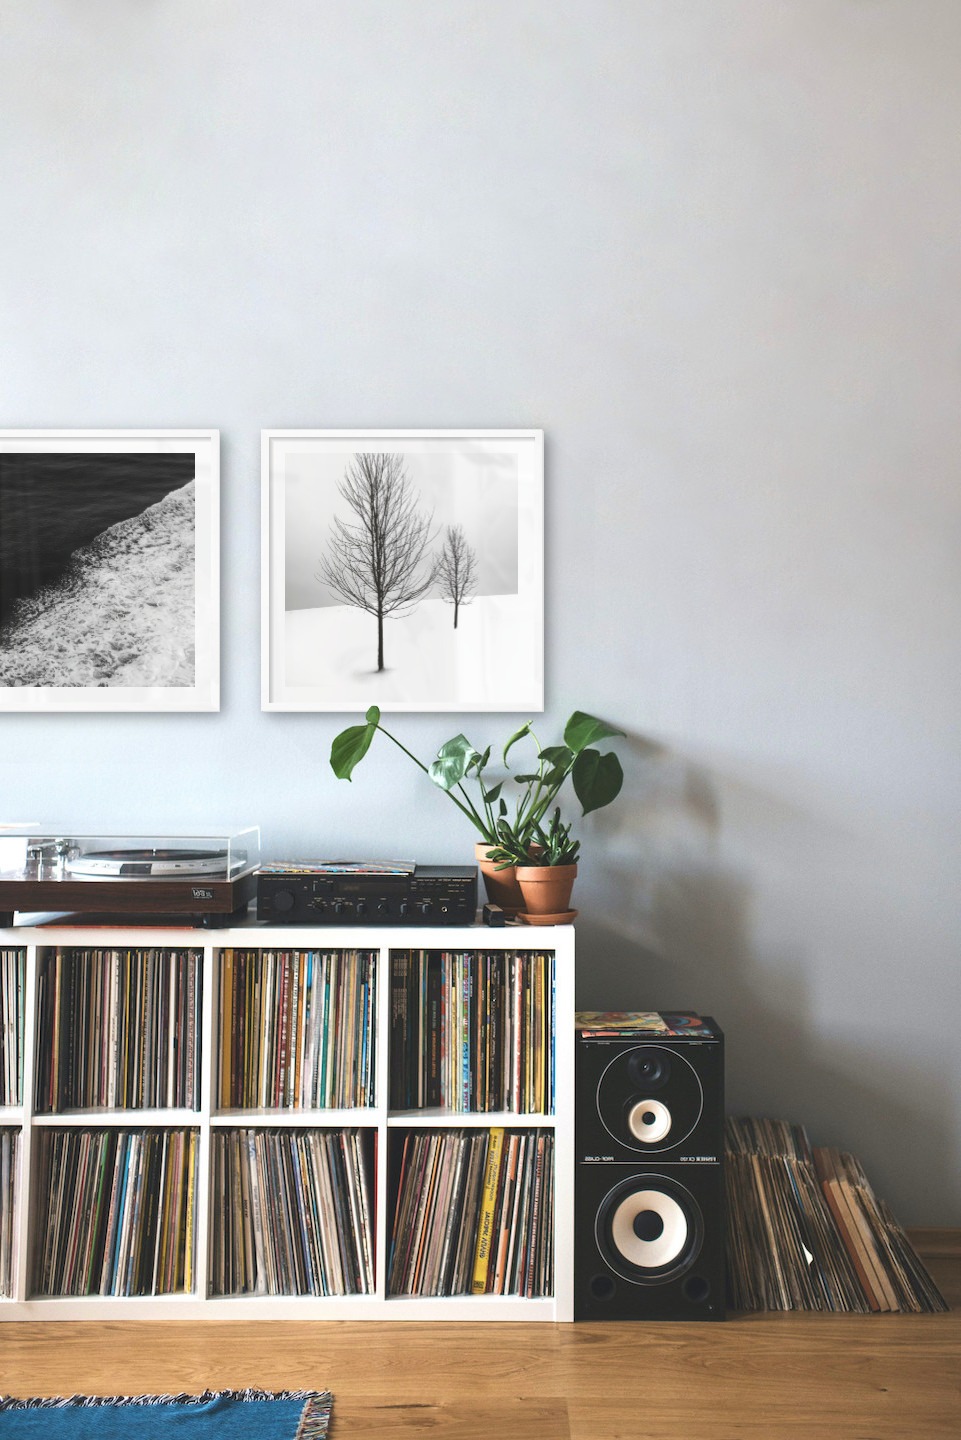 Gallery wall with picture frames in white in sizes 50x50 with prints "Swell from waves" and "Trees in the snow"